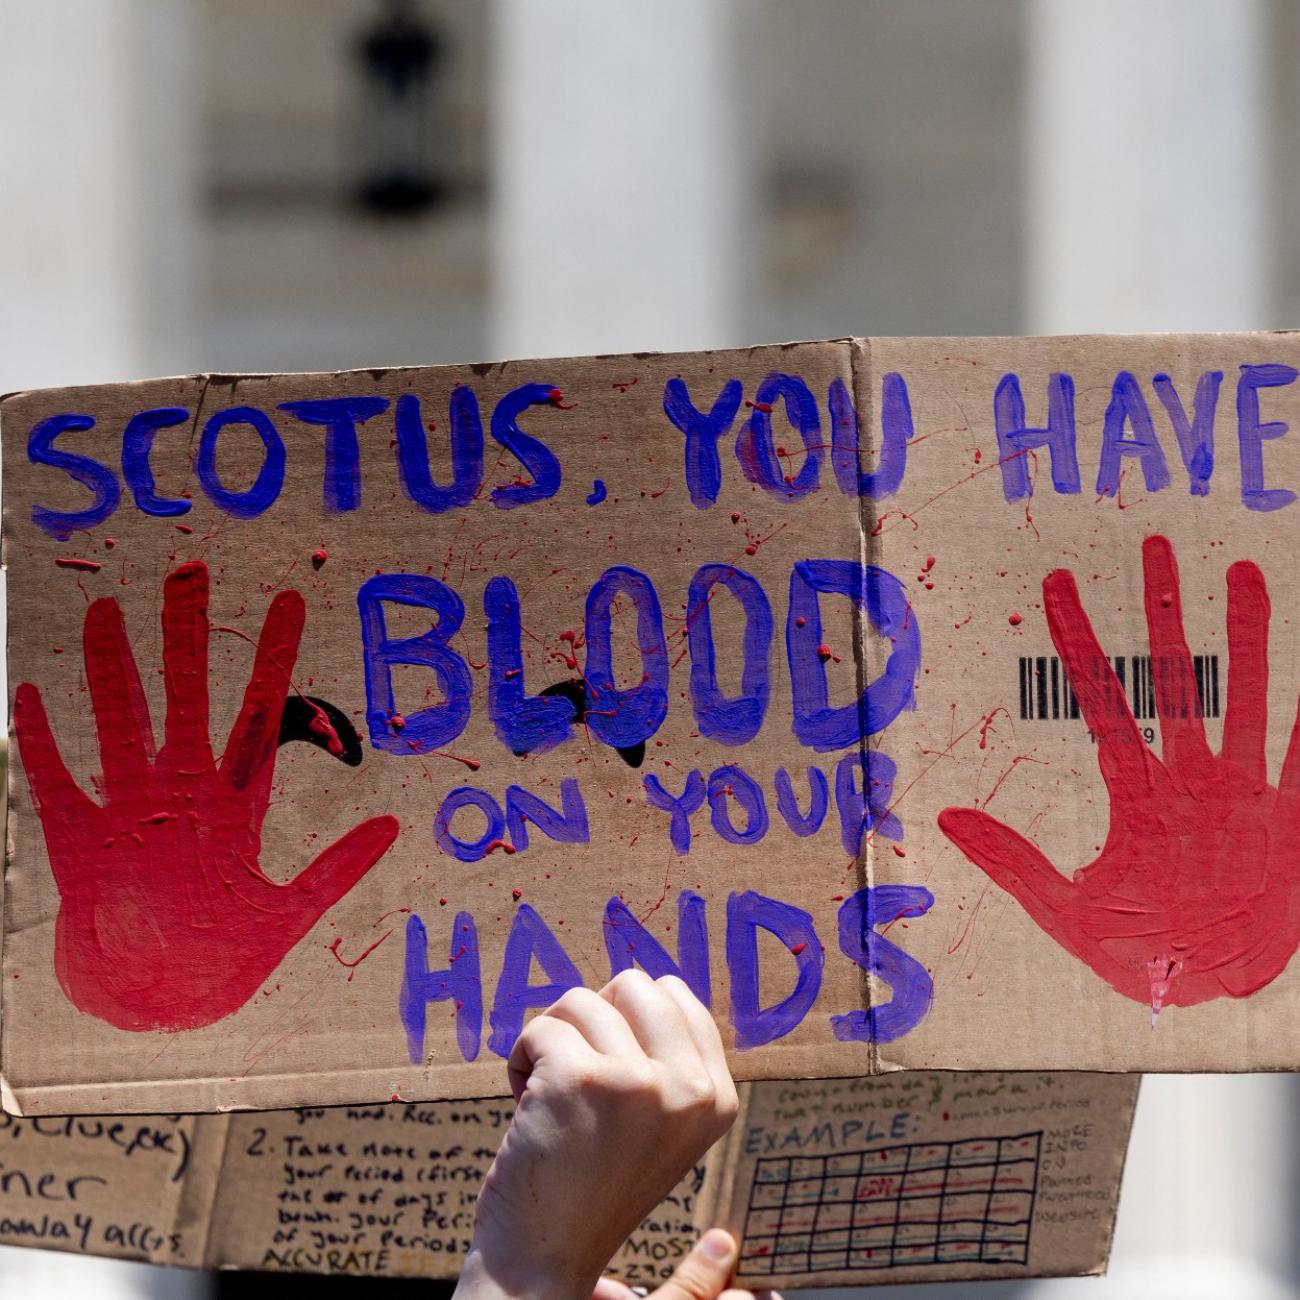 a cardboard signs reads "SCOTUS you have blood on your hands"